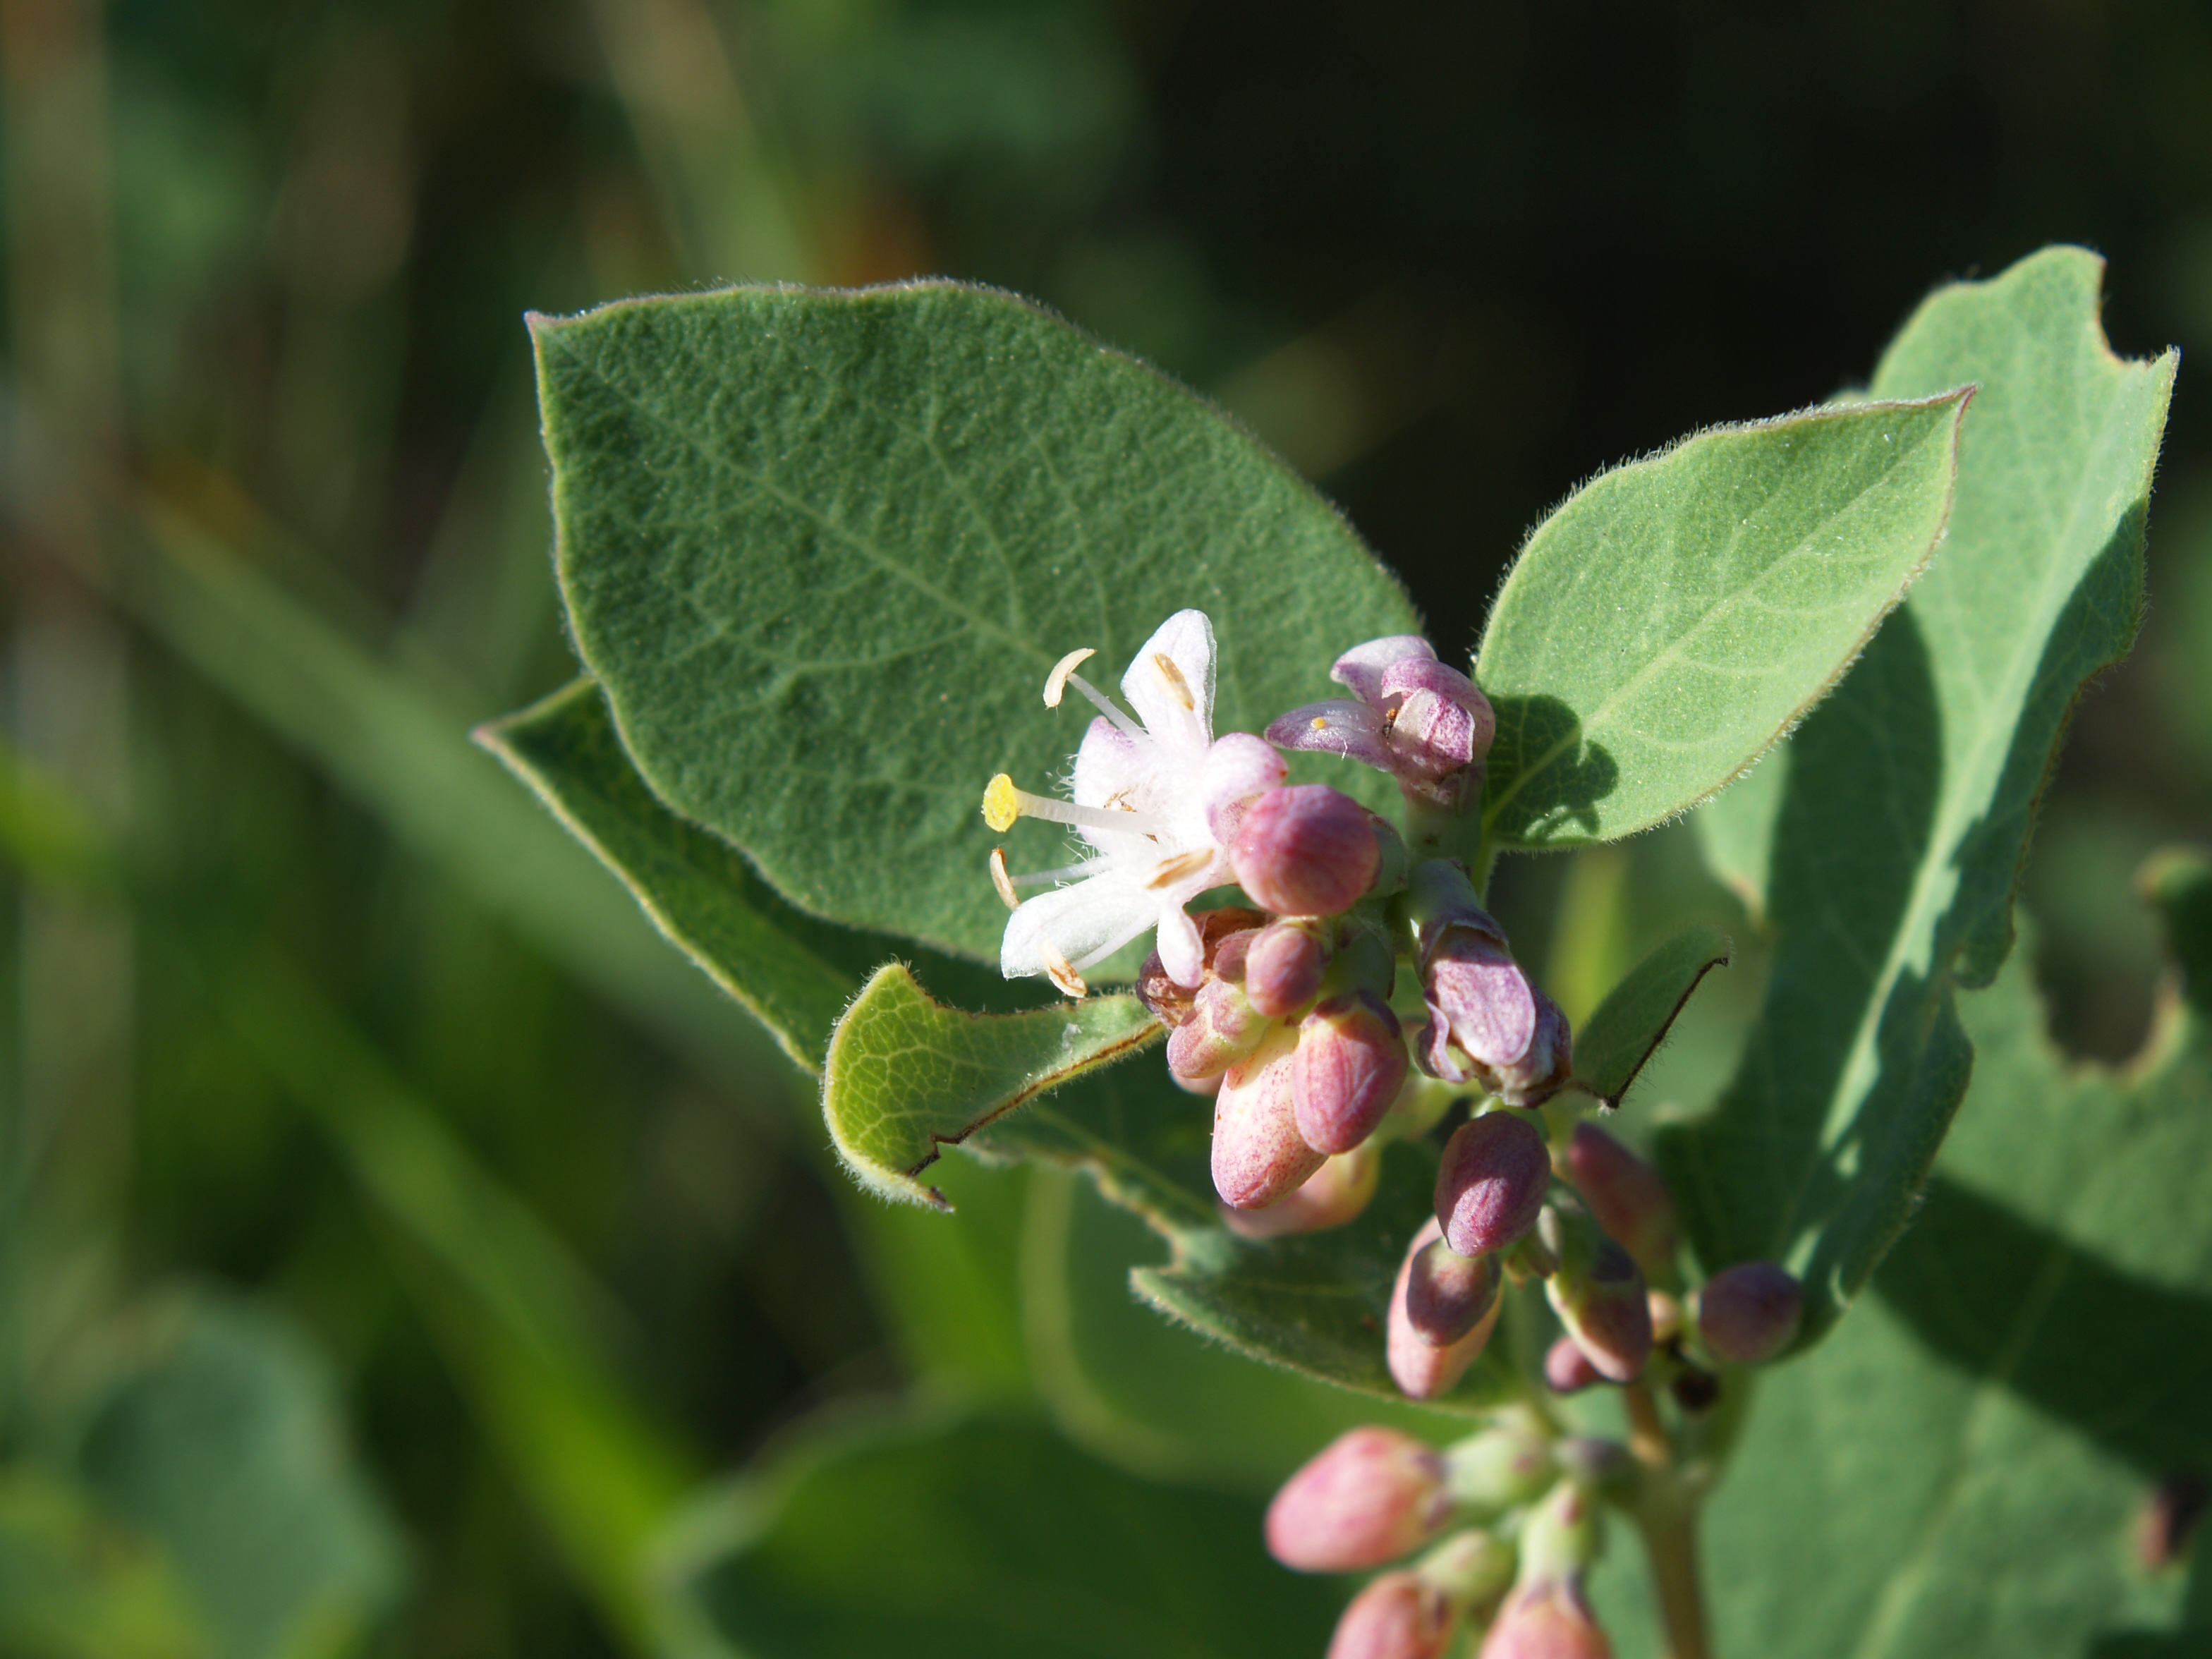 The common snowberry is one of the ozone sensitive species found at Badlands NP.